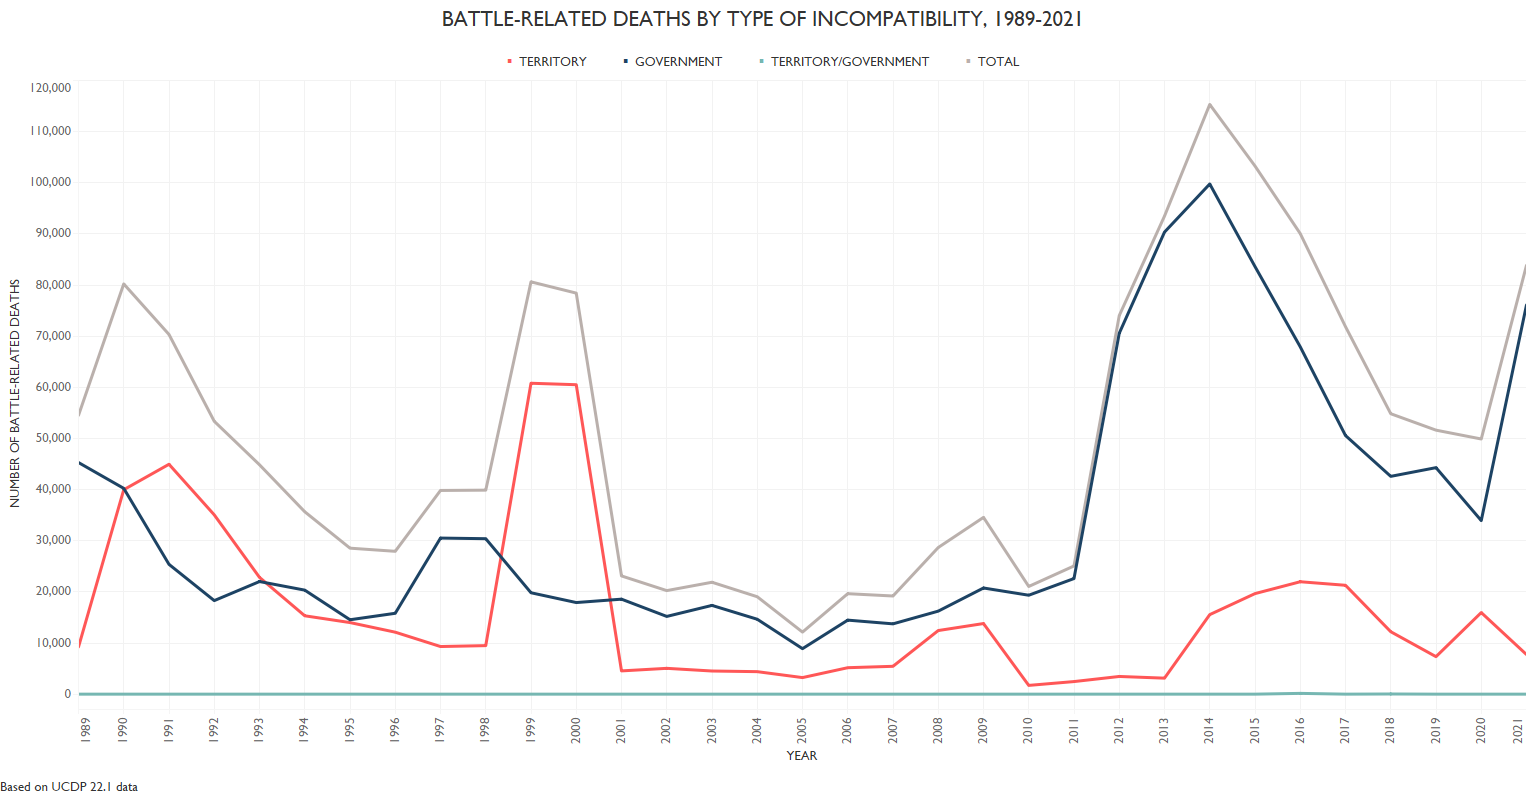 State-based: Battle-related deaths by type of incompatibility (1989-2021)